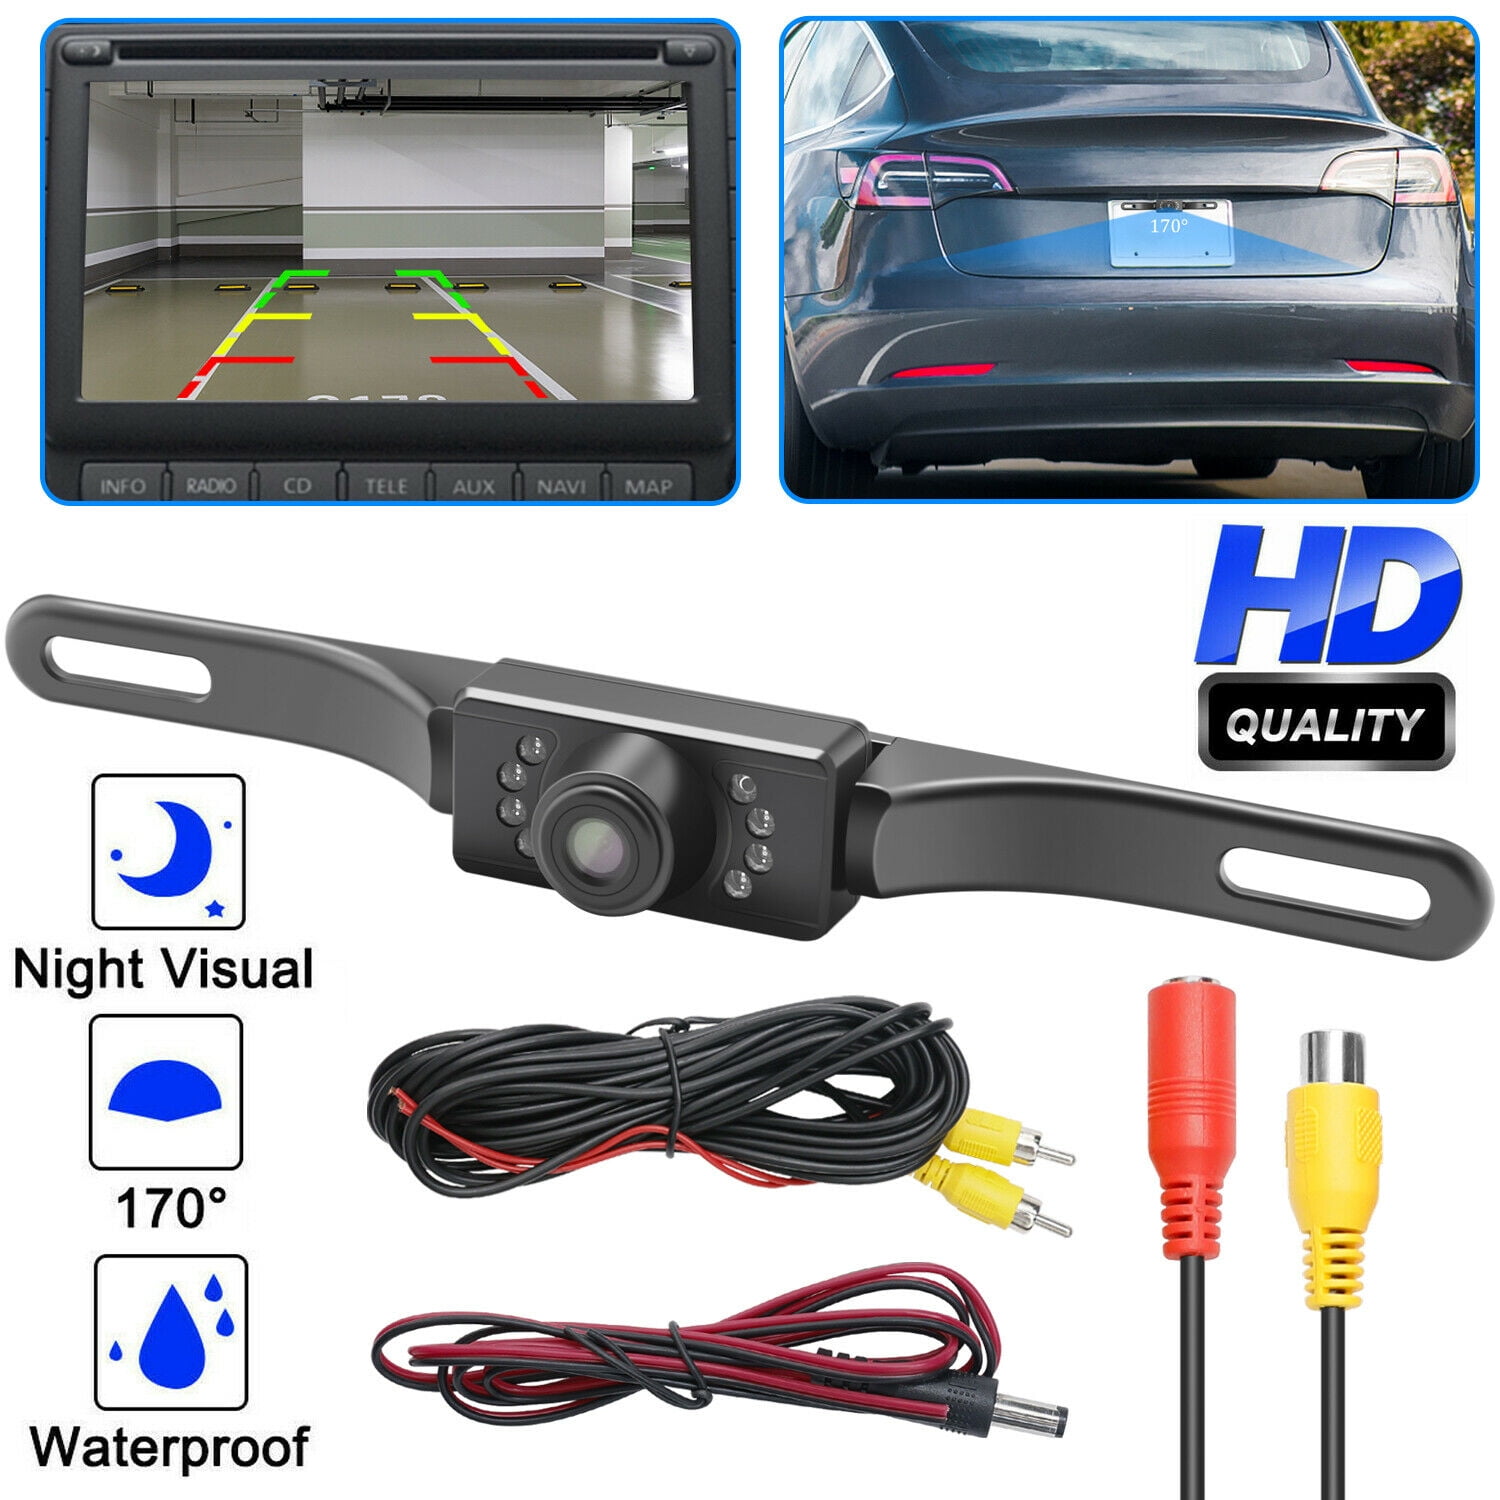 WiFi Metal Frame License Plate Night Vision Rearview Camera Phone APP Connection